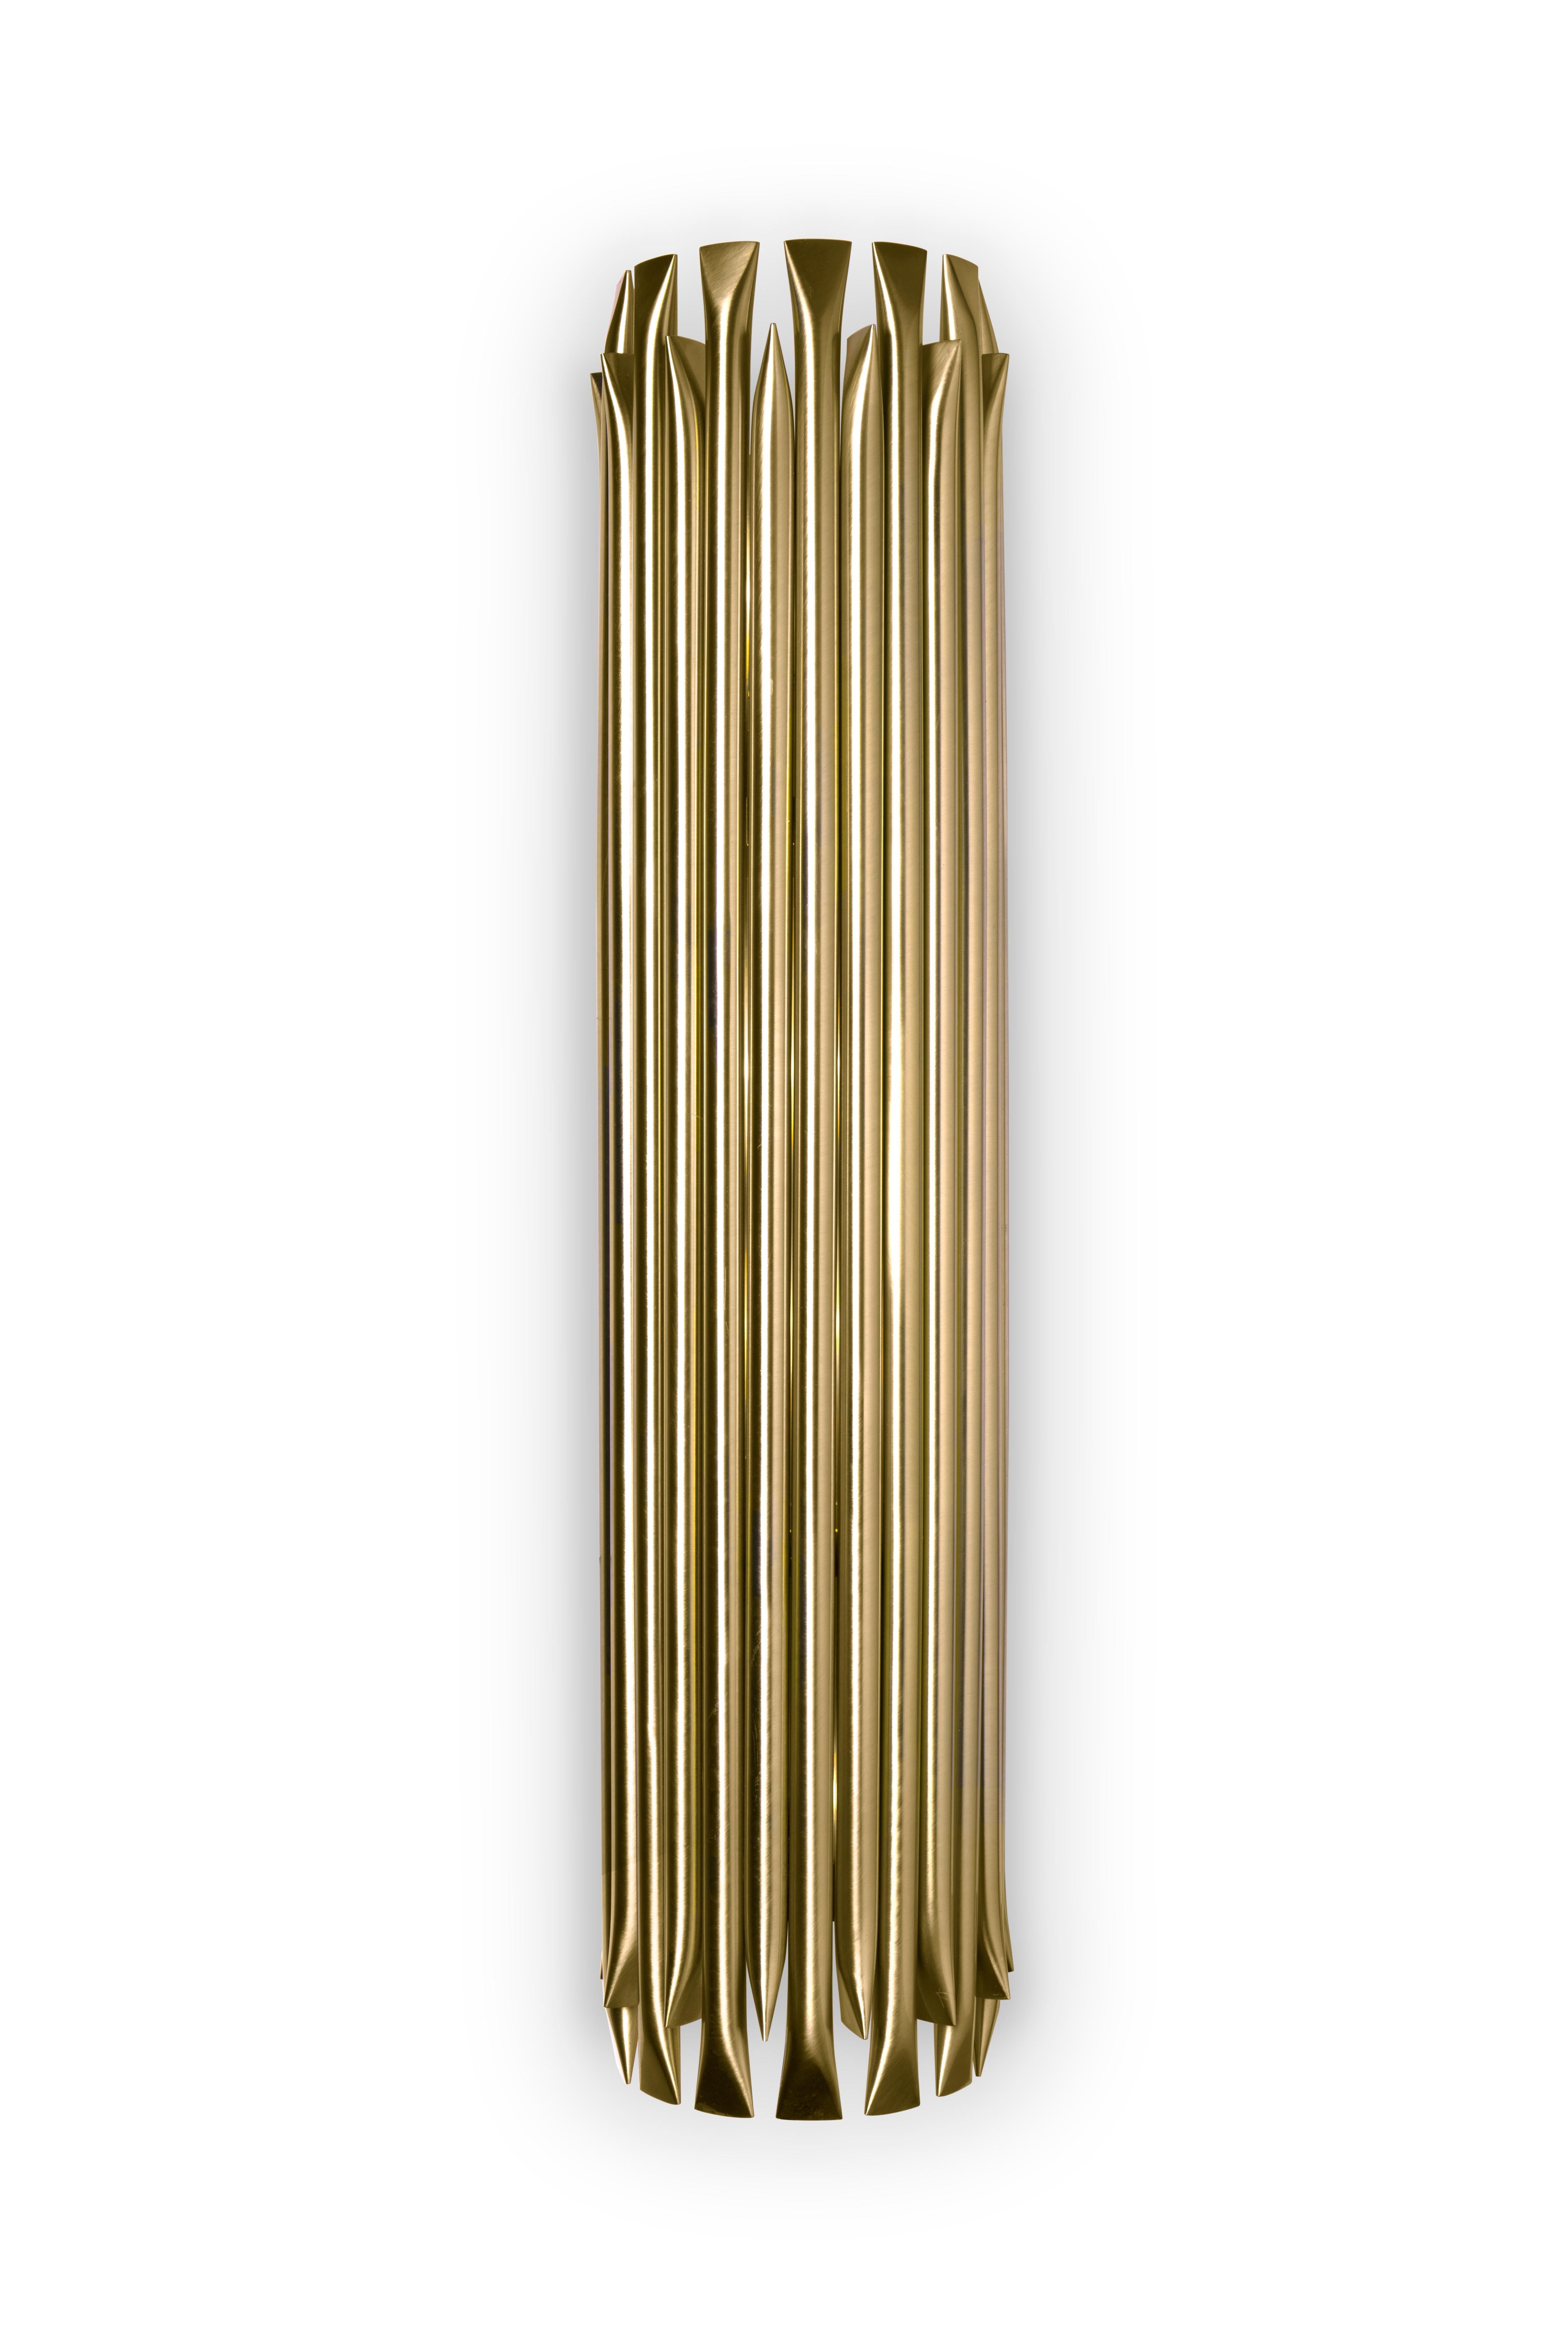 Matheny wall light has a complex and attractive geometry design of combined tubes. This unique lamp combines a Mid-Century Modern design with a Classic style that will make a statement in your home. Providing a subtle glow, this modern wall light is